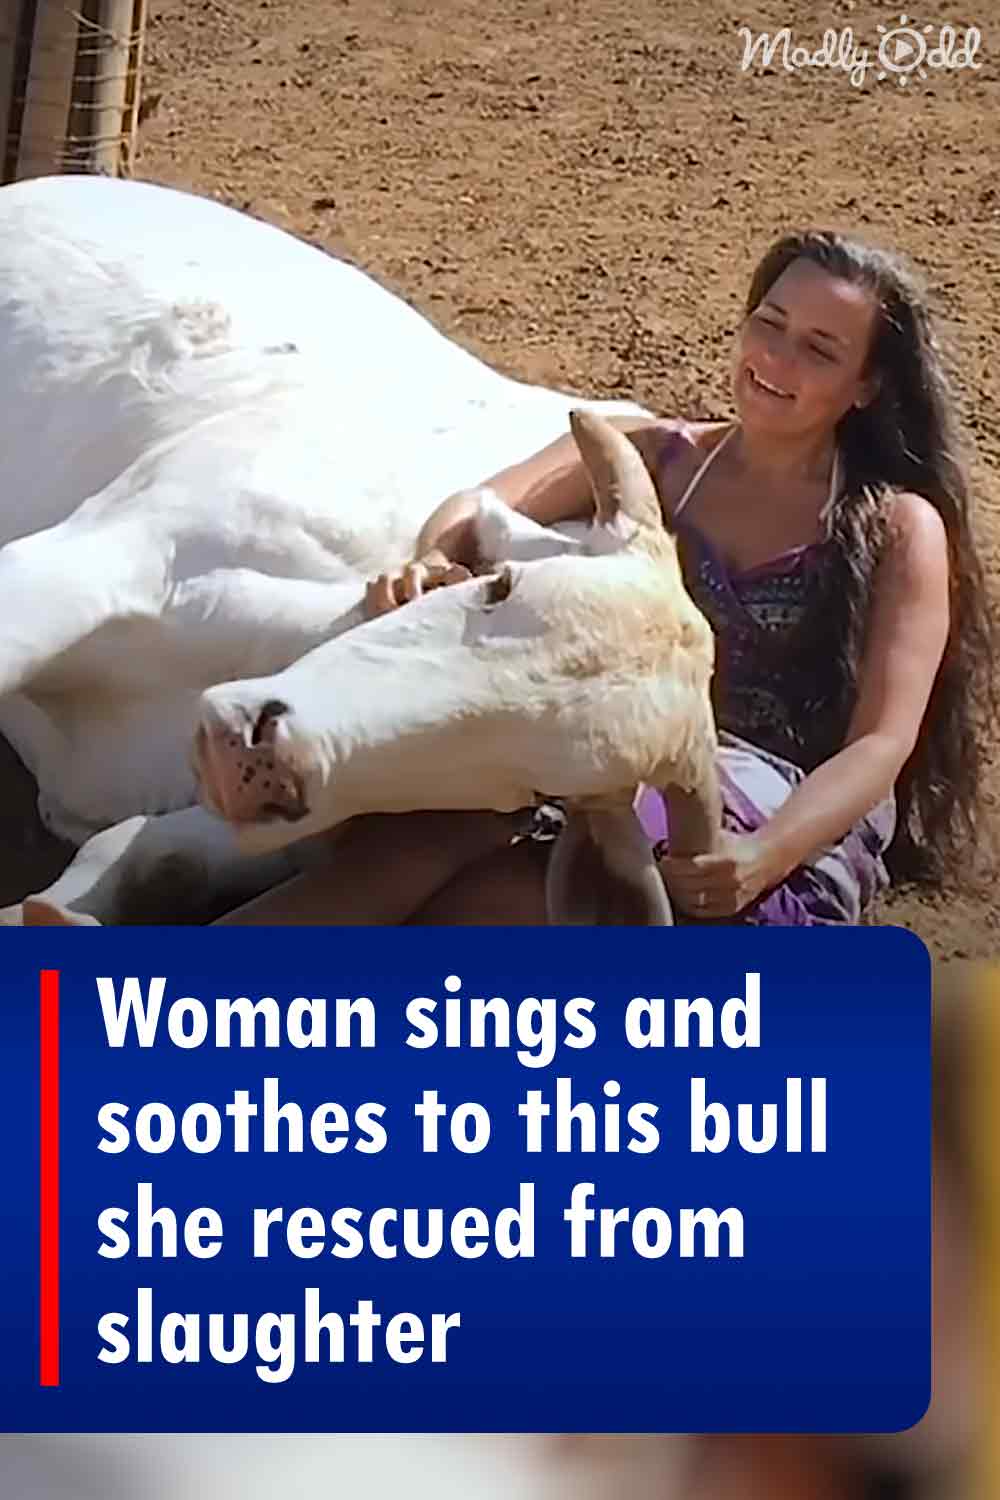 Woman sings and soothes to this bull she rescued from slaughter